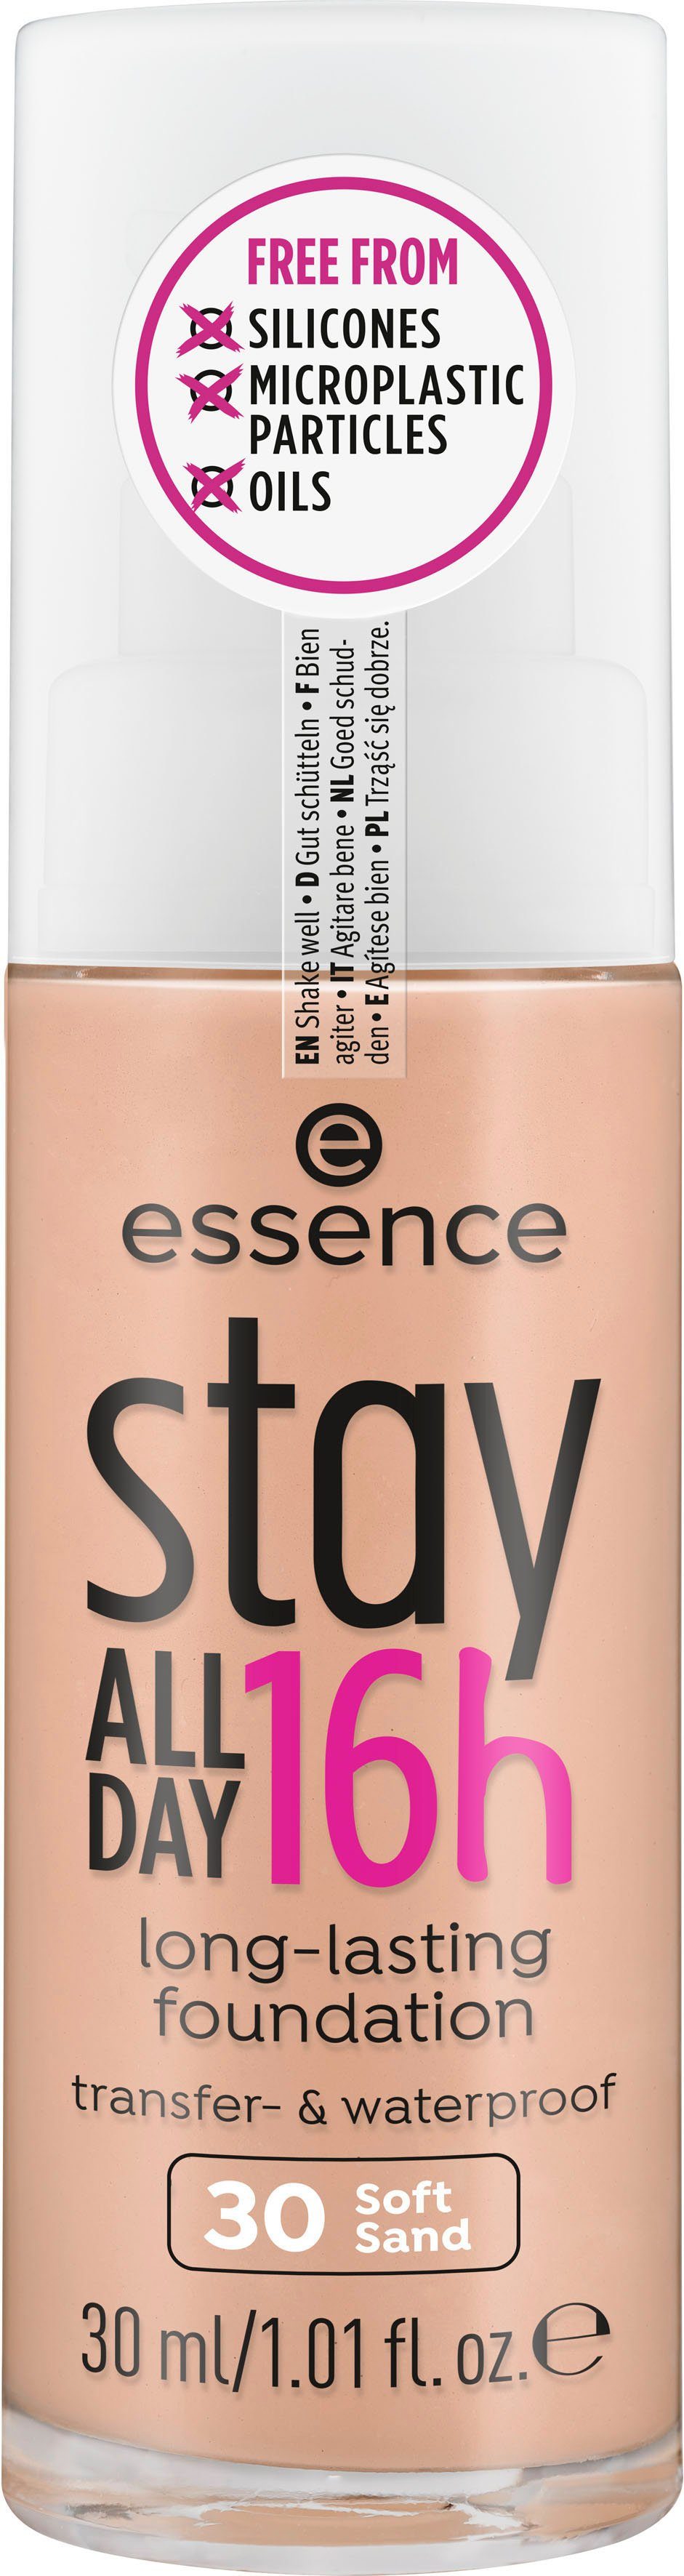 long-lasting, 16h DAY Sand ALL Foundation Soft Essence stay 3-tlg.